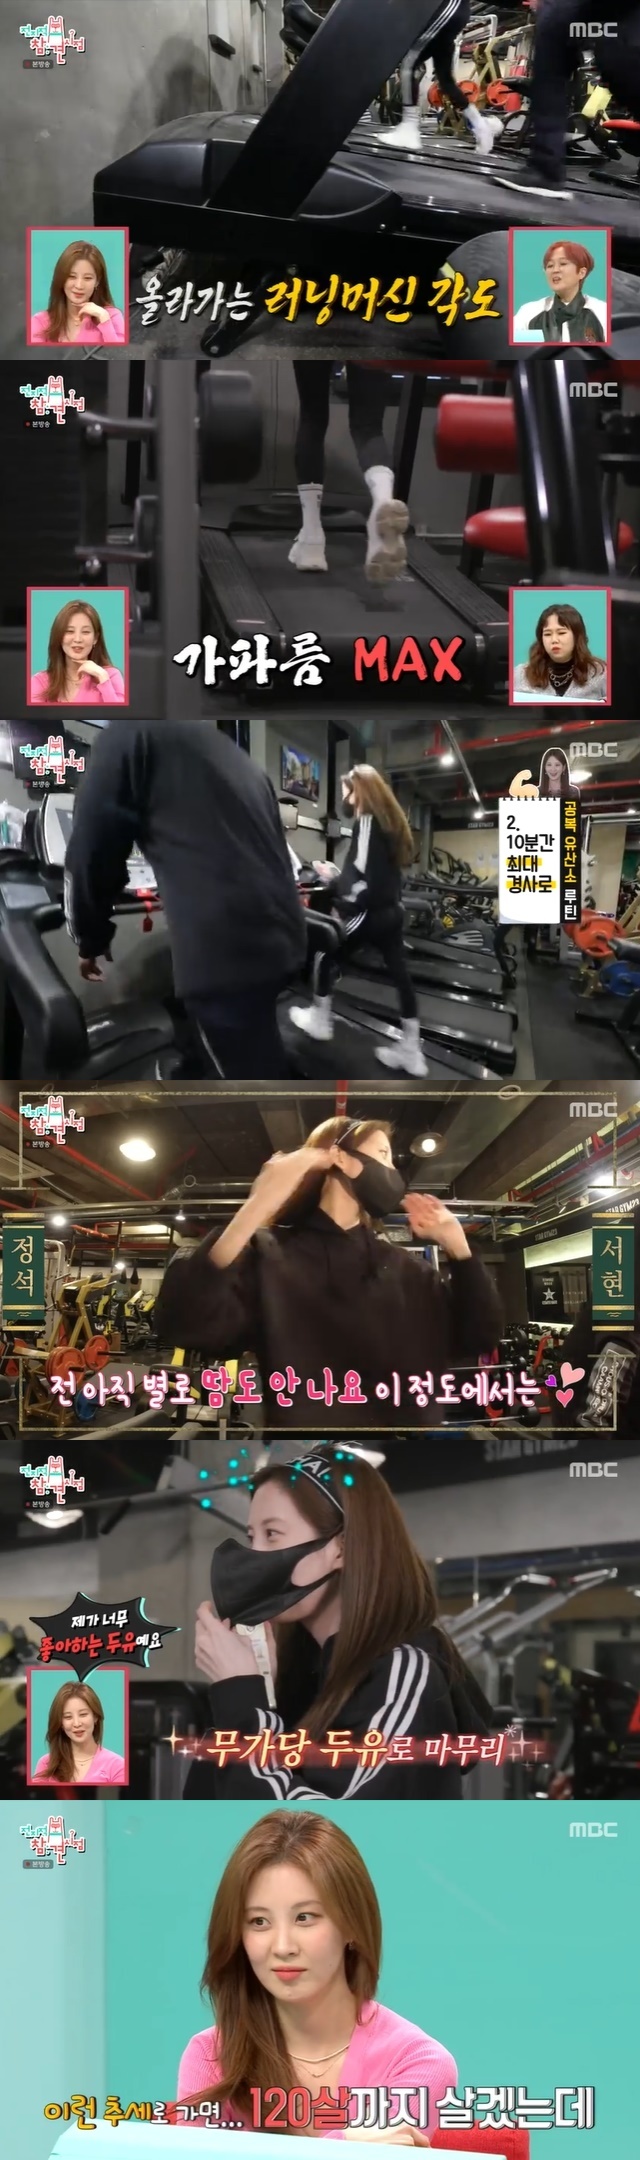 Girls Generation Seohyun boasted health beauty as a man also pretended to exercise hard fasting.In the 188th MBC entertainment Point of Omniscient Interfere (hereinafter referred to as Point of Omniscient Interfere) broadcast on February 19, the health management law of Seohyun was revealed.On this day, Seohyun woke up in the morning and went to the gym in an empty stomach.Special MC Seo Jang-hoon was surprised that Seohyun is the owner in the appearance of Seohyun who opens the door of the empty gym and turns on the light.Ive been around for over a decade, and Im (in) coming in the morning because my teacher gave me the password, Seohyun explained.Seohyun, who has been exercising for 10 years only in a gym, washed his hands and started to unpack after taking care of the disinfectant.Seahoun relaxed from his slender arms and grabbed a long rod to increase his shoulder death, which Seohyun described as this is really cool, a good exercise for round shoulder.Soon, Mr. Manager Miniforce joined the Seohyun movement.Seohyun was always trying to exercise him, but this time he realized that he was surprised by the past photos of Mr. Miniforce, a former basketball player, and said, Lets go back to those days soon.Life is only once, cheered Diet, who had decided to shoot a body profile at the end of June.Seohyun generously passed on management tips to Manager, who first asked Mr Miniforce if he had breakfast and stressed that anorexic aerobics are important.Seohyun then asked to climb on the scale to measure Managers current condition and was appalled by his 102.2kg weight.If you just do it today, you lose 1kg, Seohyun assured.Later, the 30-minute exercise method by Seohyun was revealed.Seohyun exercised fasting aerobics for 30 minutes, and the first 10 minutes walked on the Trademill (running machine) at a flat angle, and the next 10 minutes increased the Trademill angle to a maximum tilt angle.The other ten minutes were to flail at a maximum angle; Seohyun explained, When I first did this, I was pierced in the neck within a minute, and gave me a tremendous intensity of exercise.Diets should not be rushed; they are bad for the body and they are old, they should be done every day, Seohyun advised, and in his case, you keep doing this with a grit.I only do it for 30 minutes. Seohyun did not sweat so much after finishing the exercise.How hard Seohyuns exercise method is proved to have changed Managers weight to 101.7kg after the exercise.Seohyun gave Manager his favorite radish milk for breakfast after finishing the exercise.The morning is the soy milk before, said Seohyun, who is surprised to say that he does not eat breakfast separately. When I give myself a prize, I eat rosé tteokbokki.Seohyun replied that it is not to Hong Hyun-hee, who suspects, Do not you still have a Girls Generation diet?